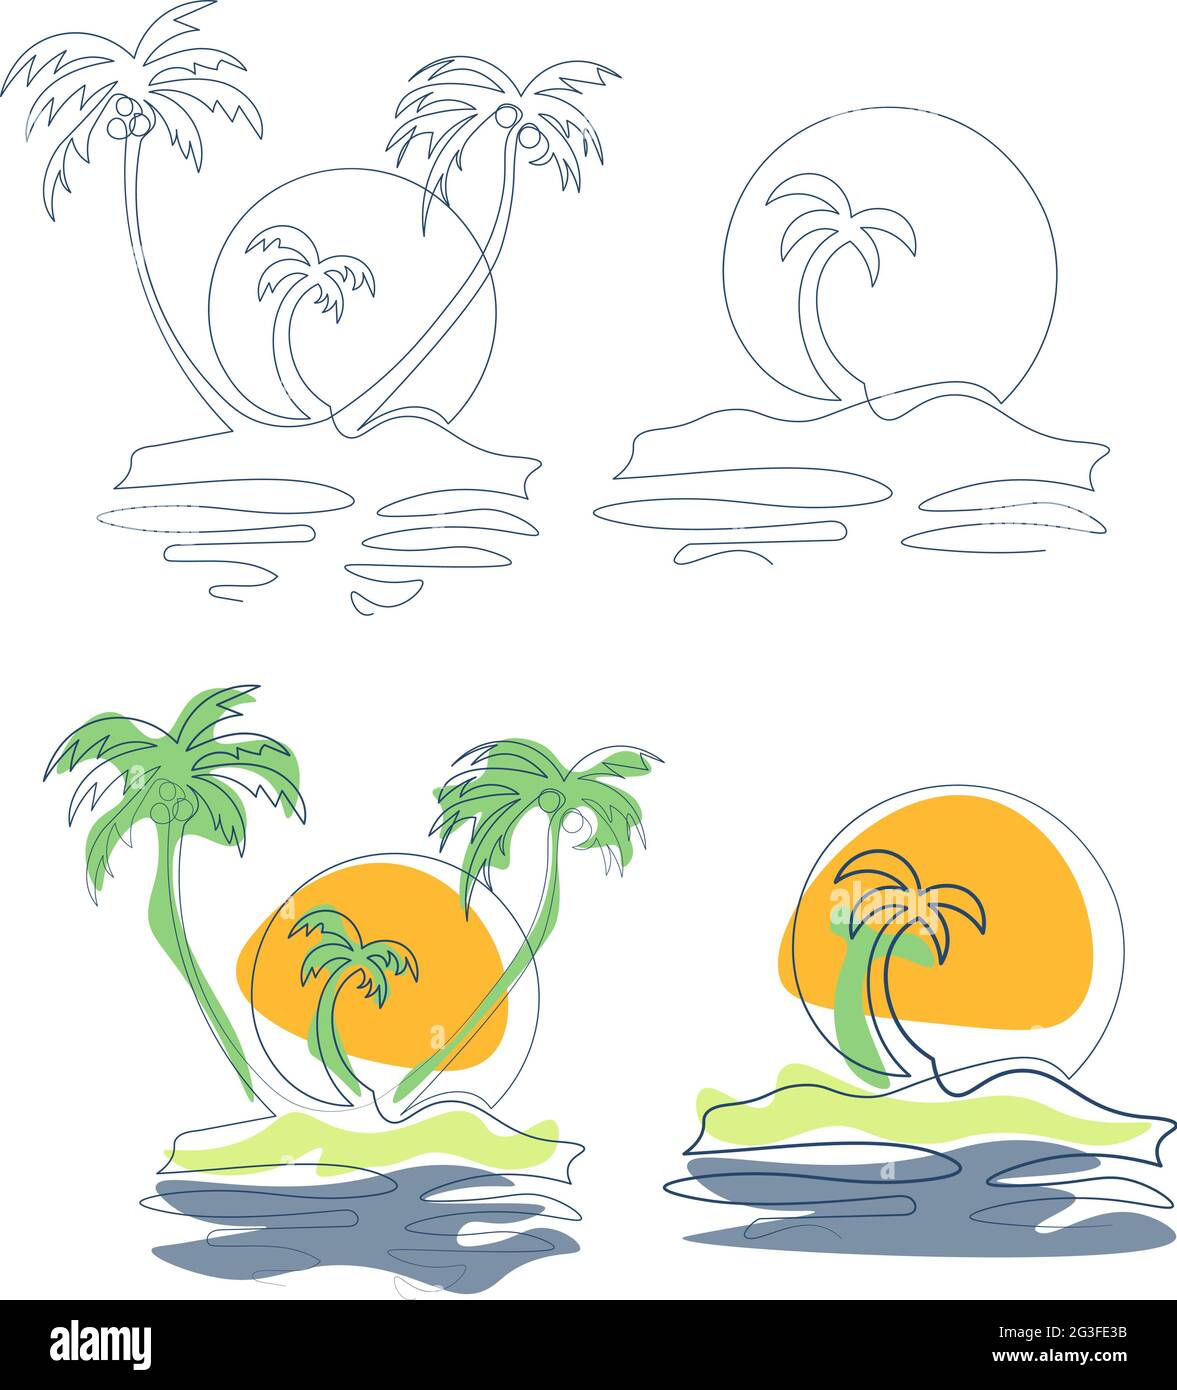 Set of icons with tropical islands drawing with single line and colored shapes Stock Vector